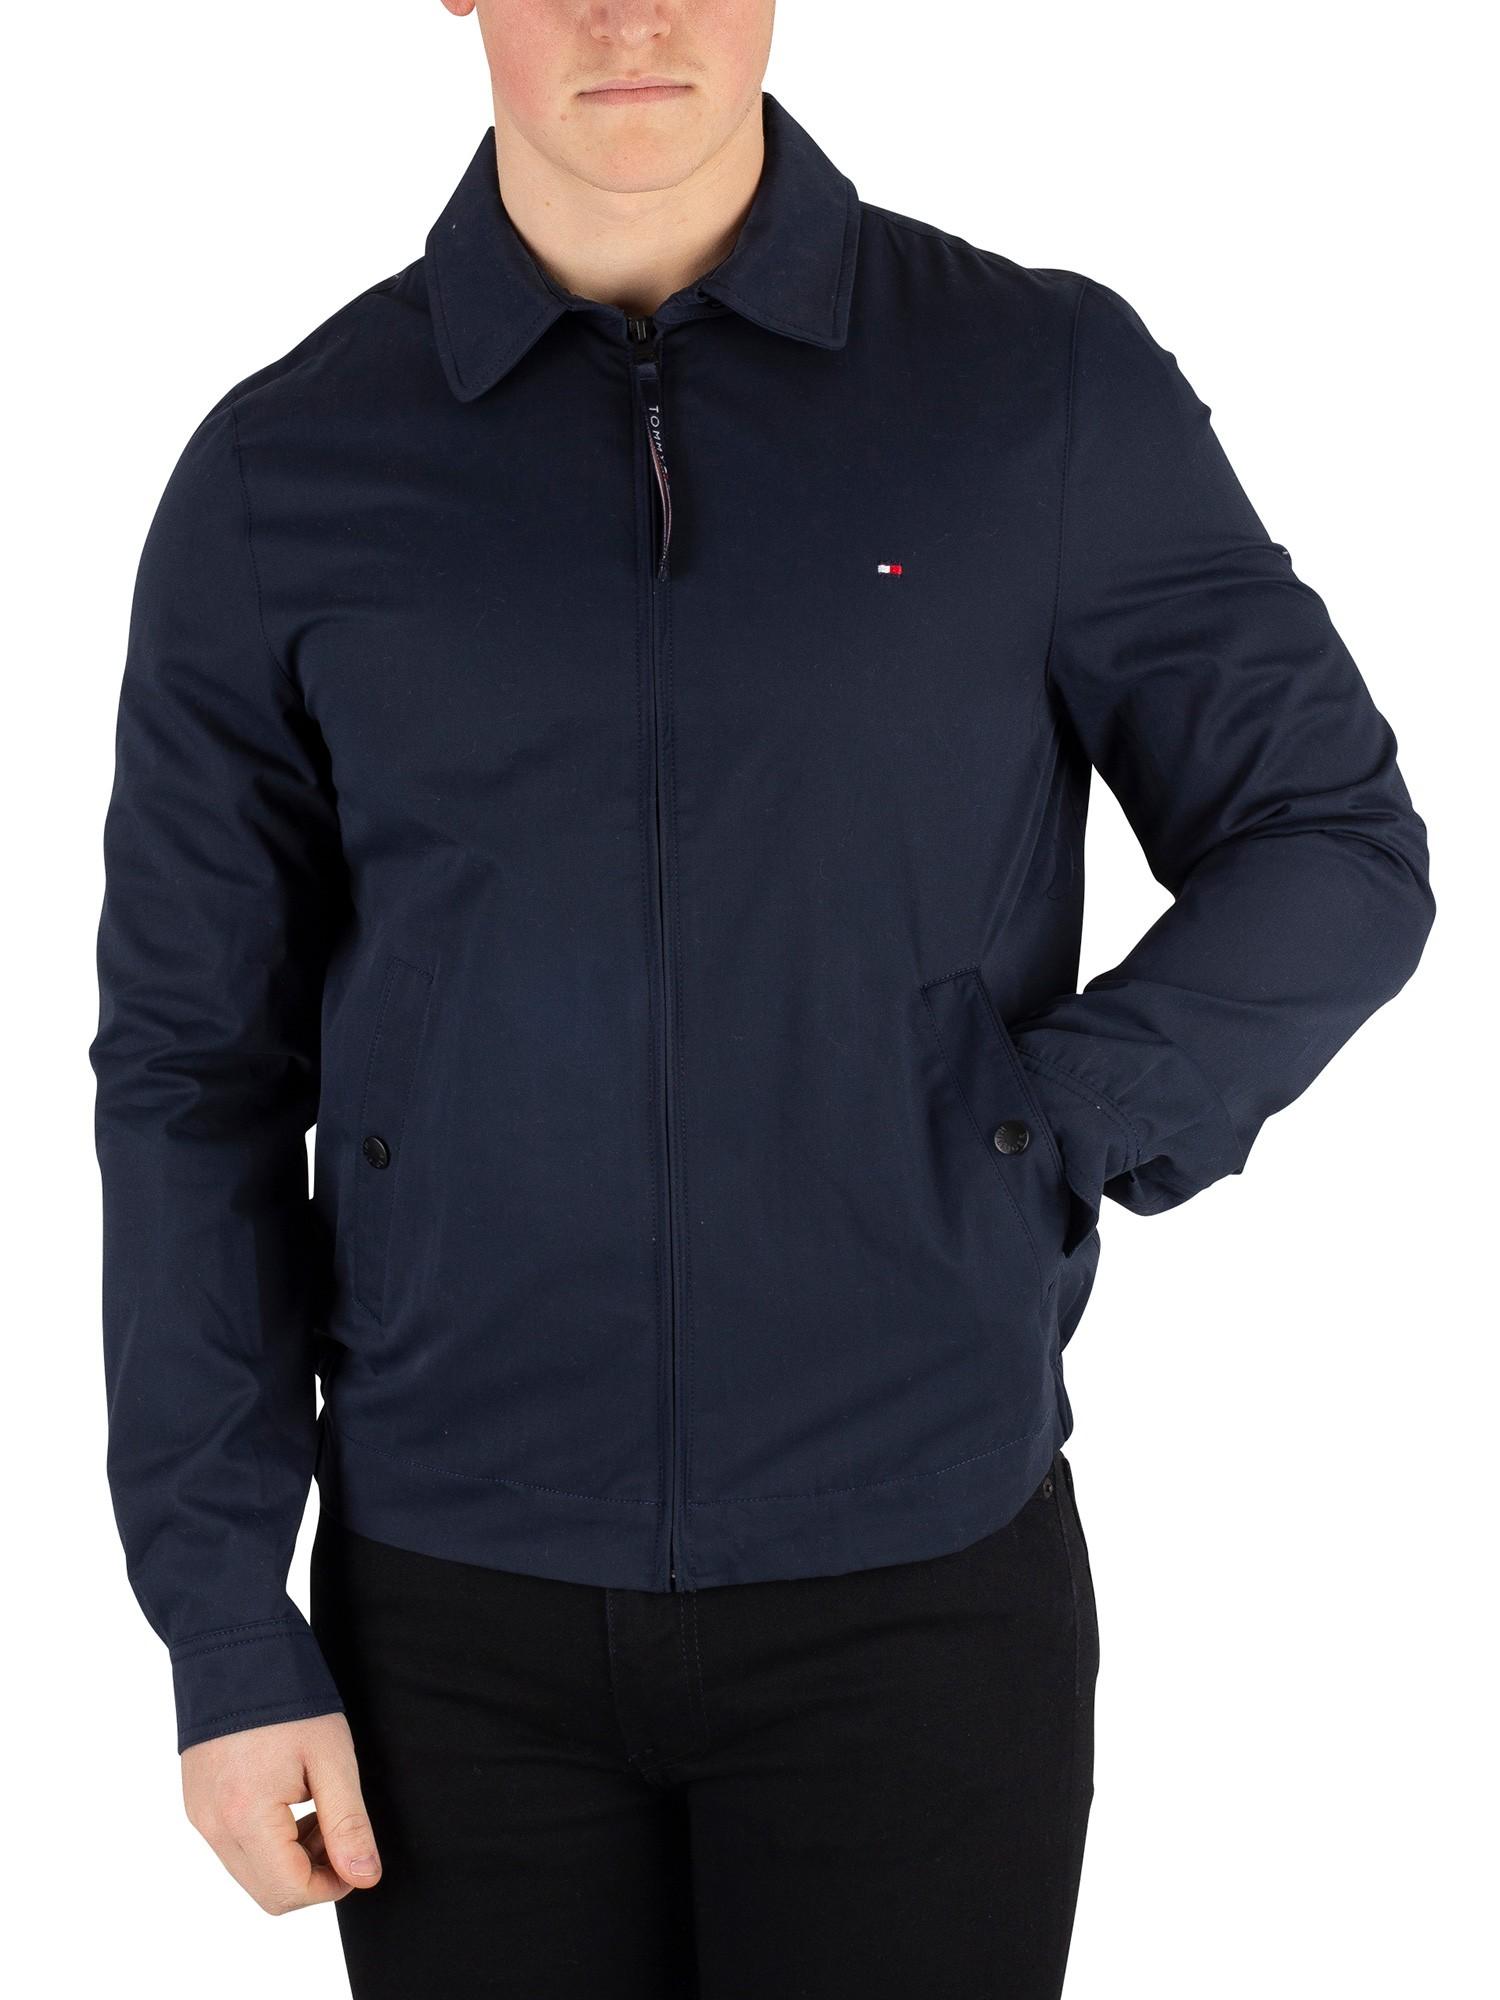 Tommy Hilfiger Cotton New Ivy Jacket in Blue for Men - Lyst